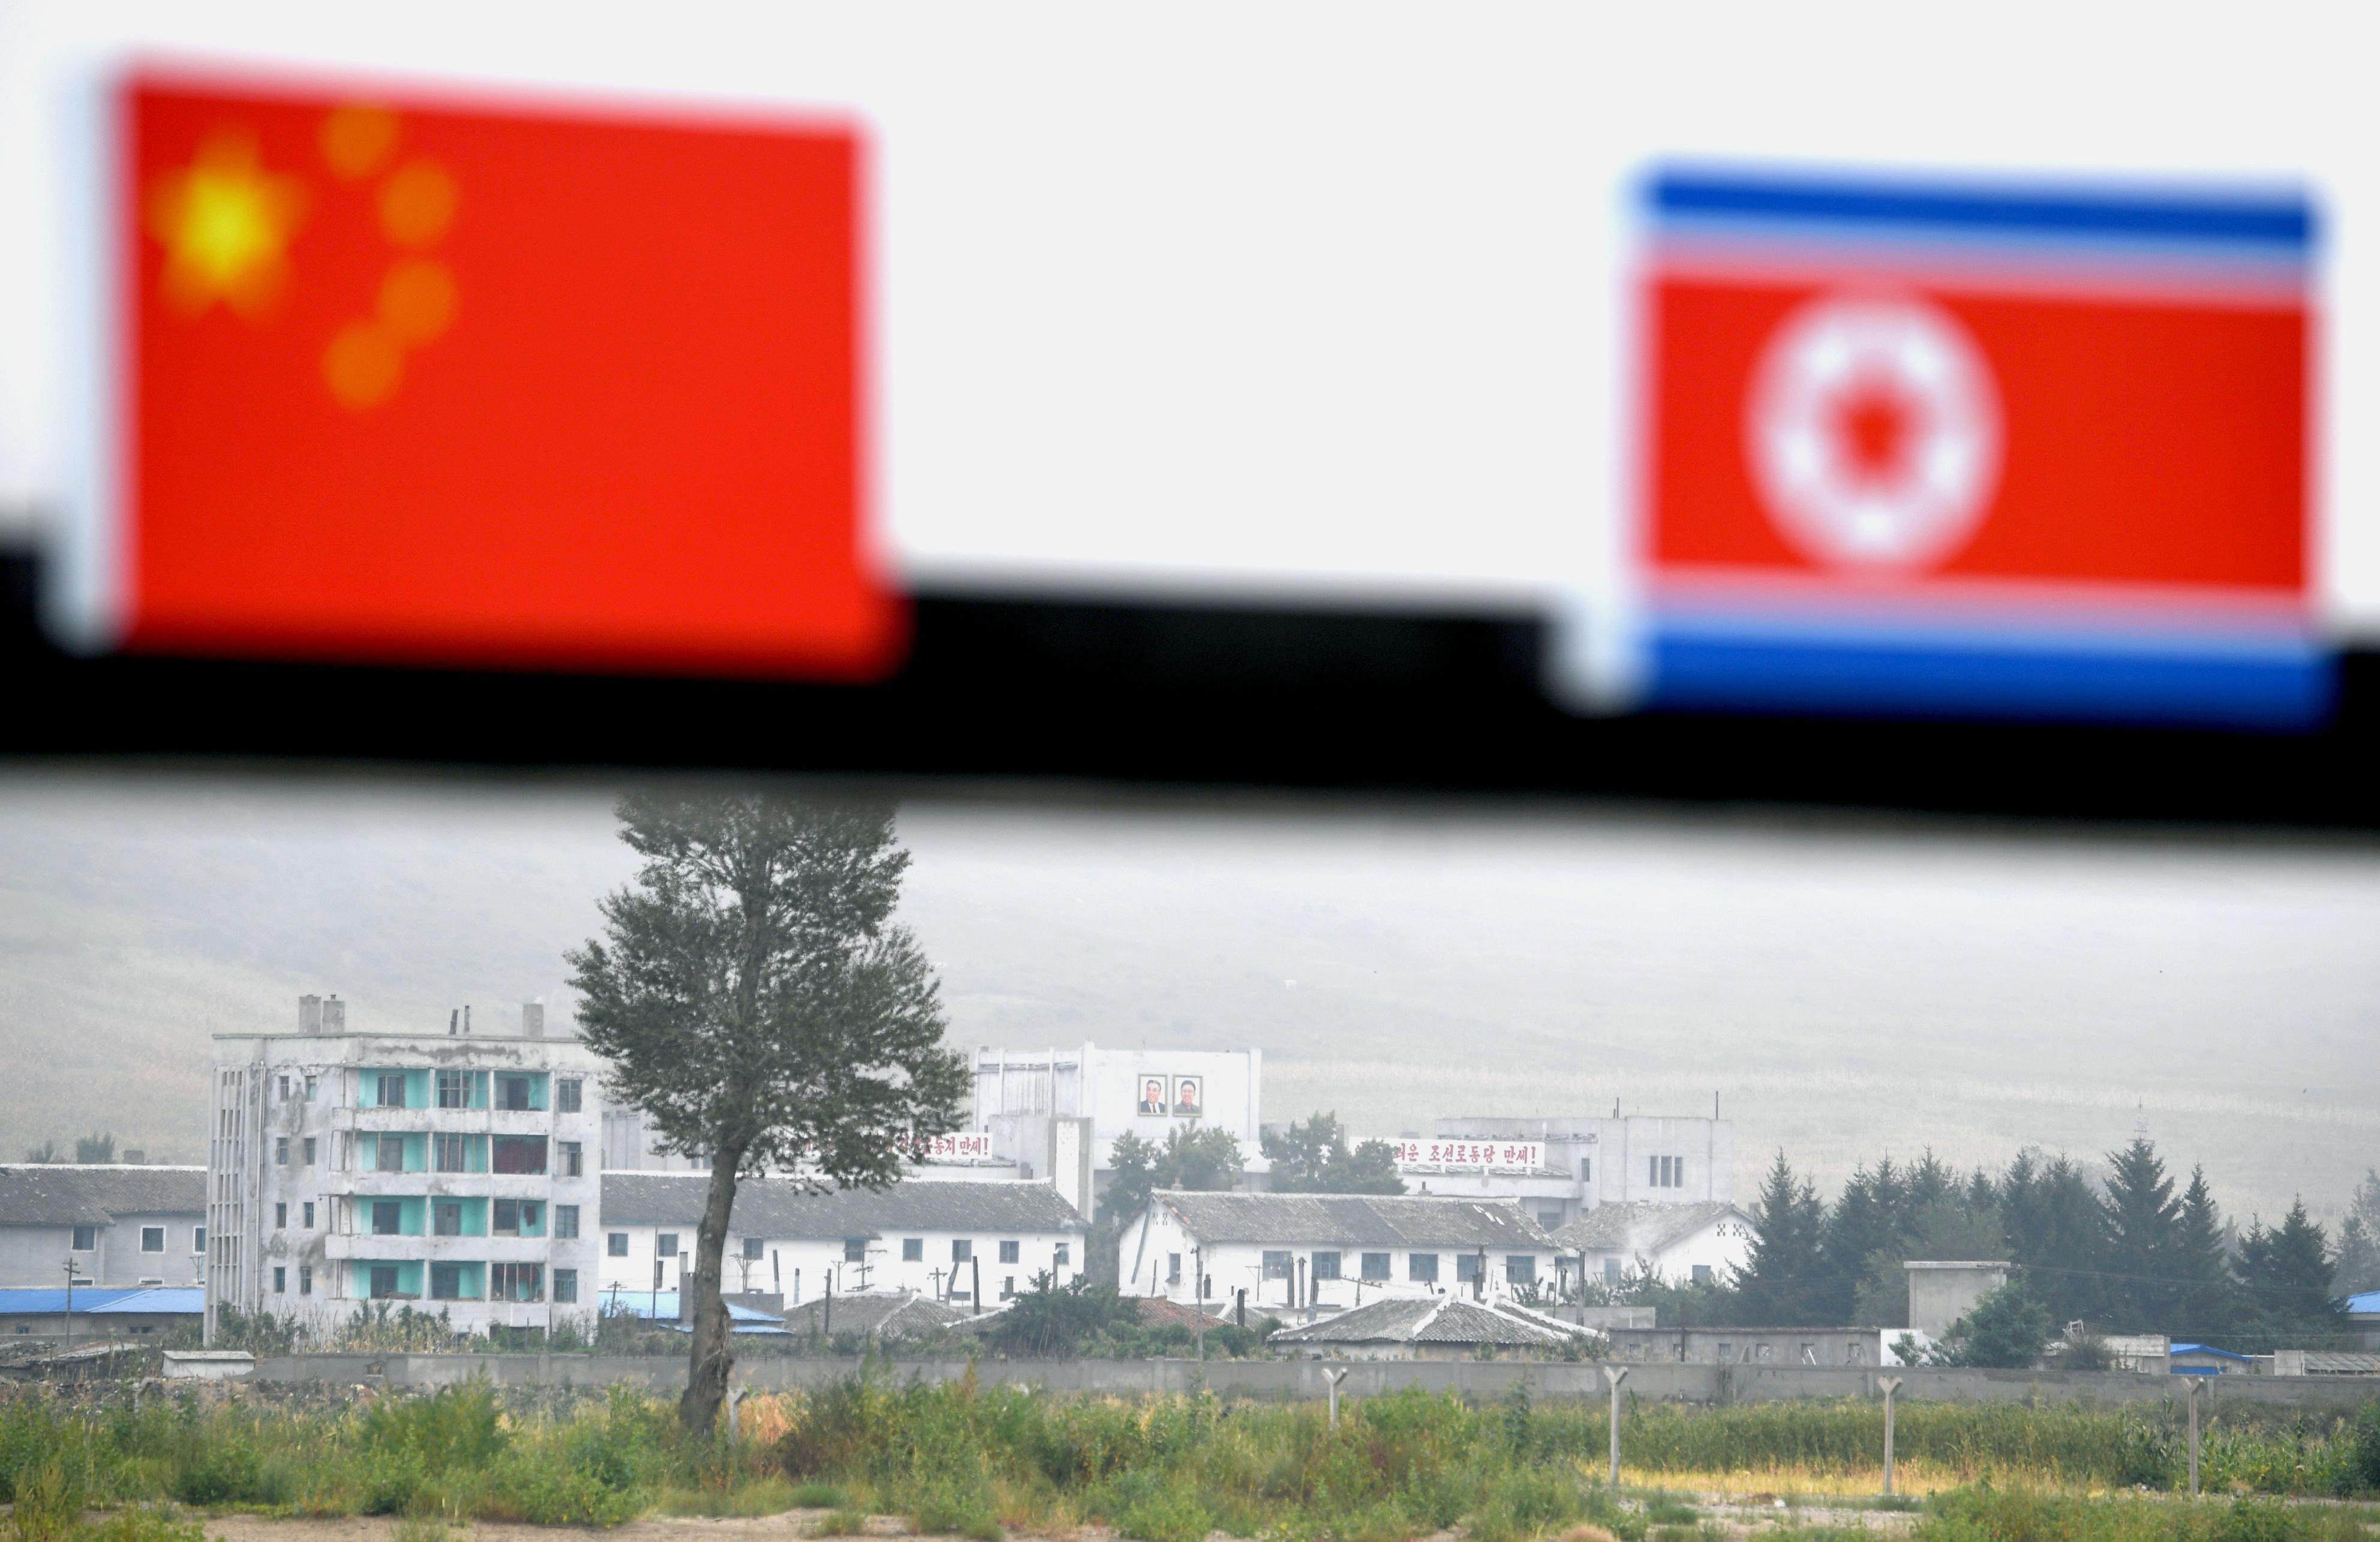 North Korea as seen from the Chinese border town of Tumen in eastern Jilin province. Attempts to repair relations between Seoul and Beijing could be damaged as South Korea calls out China over its reported repatriation of North Korean defectors. Photo: Kyodo News via AP